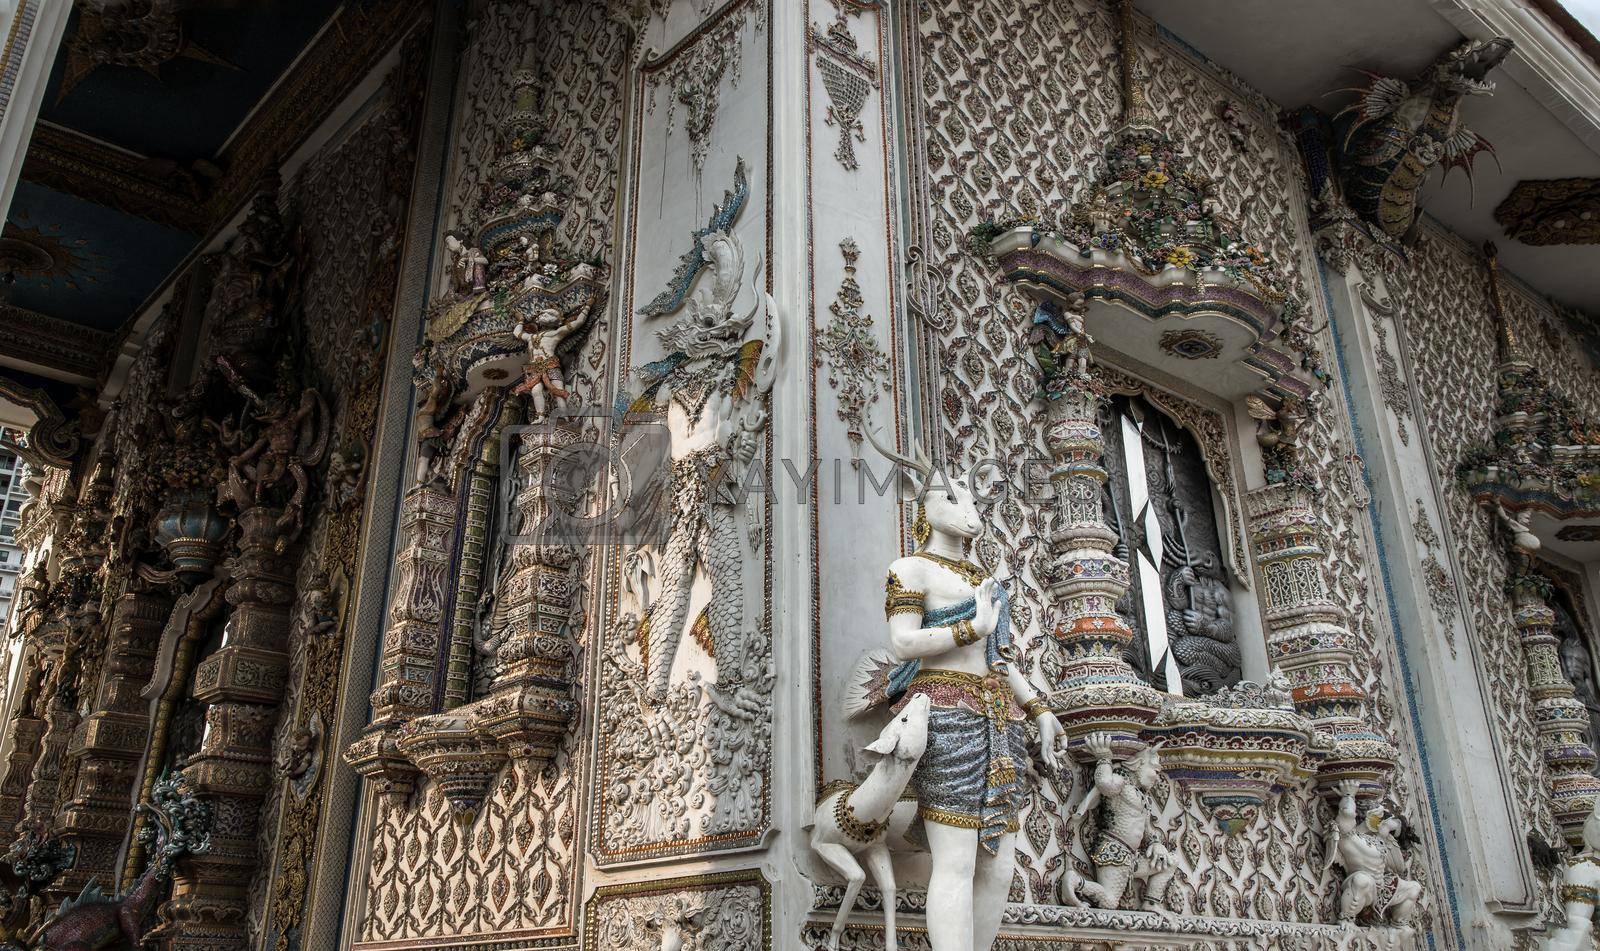 Bangkok, Thailand. Feb - 10, 2022 : Elaborate sculptures of monster is made of bricks and mortar, decorated with various colored glazed tiles at the chapel of The Pariwas Ratchasongkram temple. Selective Focus.